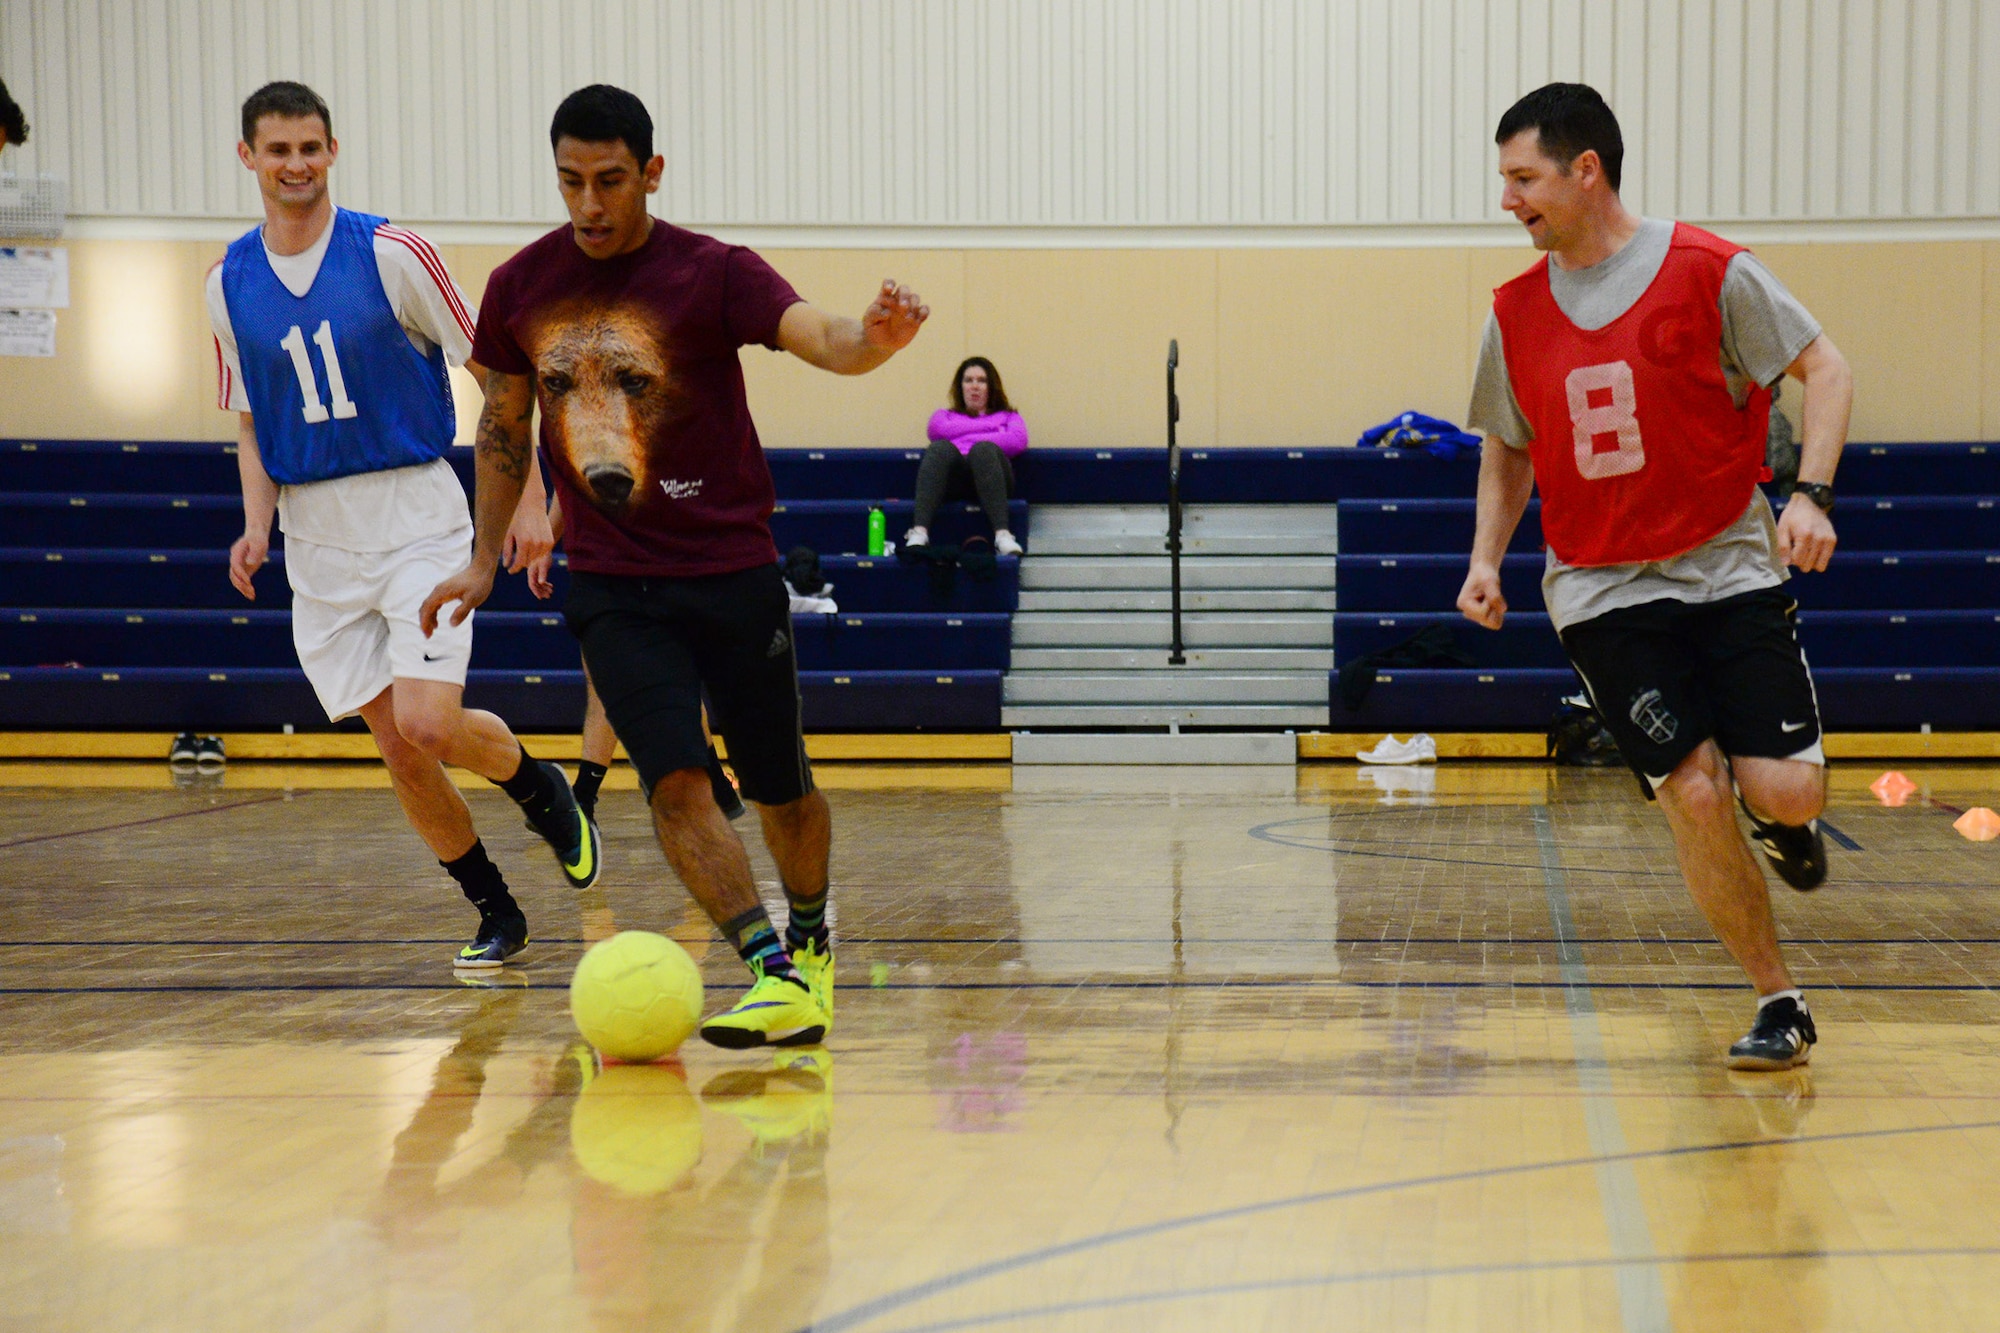 Maj. Jeremiah Kirschman, 341st Contracting Squadron commander, number eight, plays soccer with Airmen Feb. 24, 2017, at Malmstrom Air Force Base, Mont. The fitness center is hosting indoor soccer every Friday 5-7 p.m. at the basketball courts. (U.S. Air Force photo/Airman 1st Class Magen. M. Reeves)